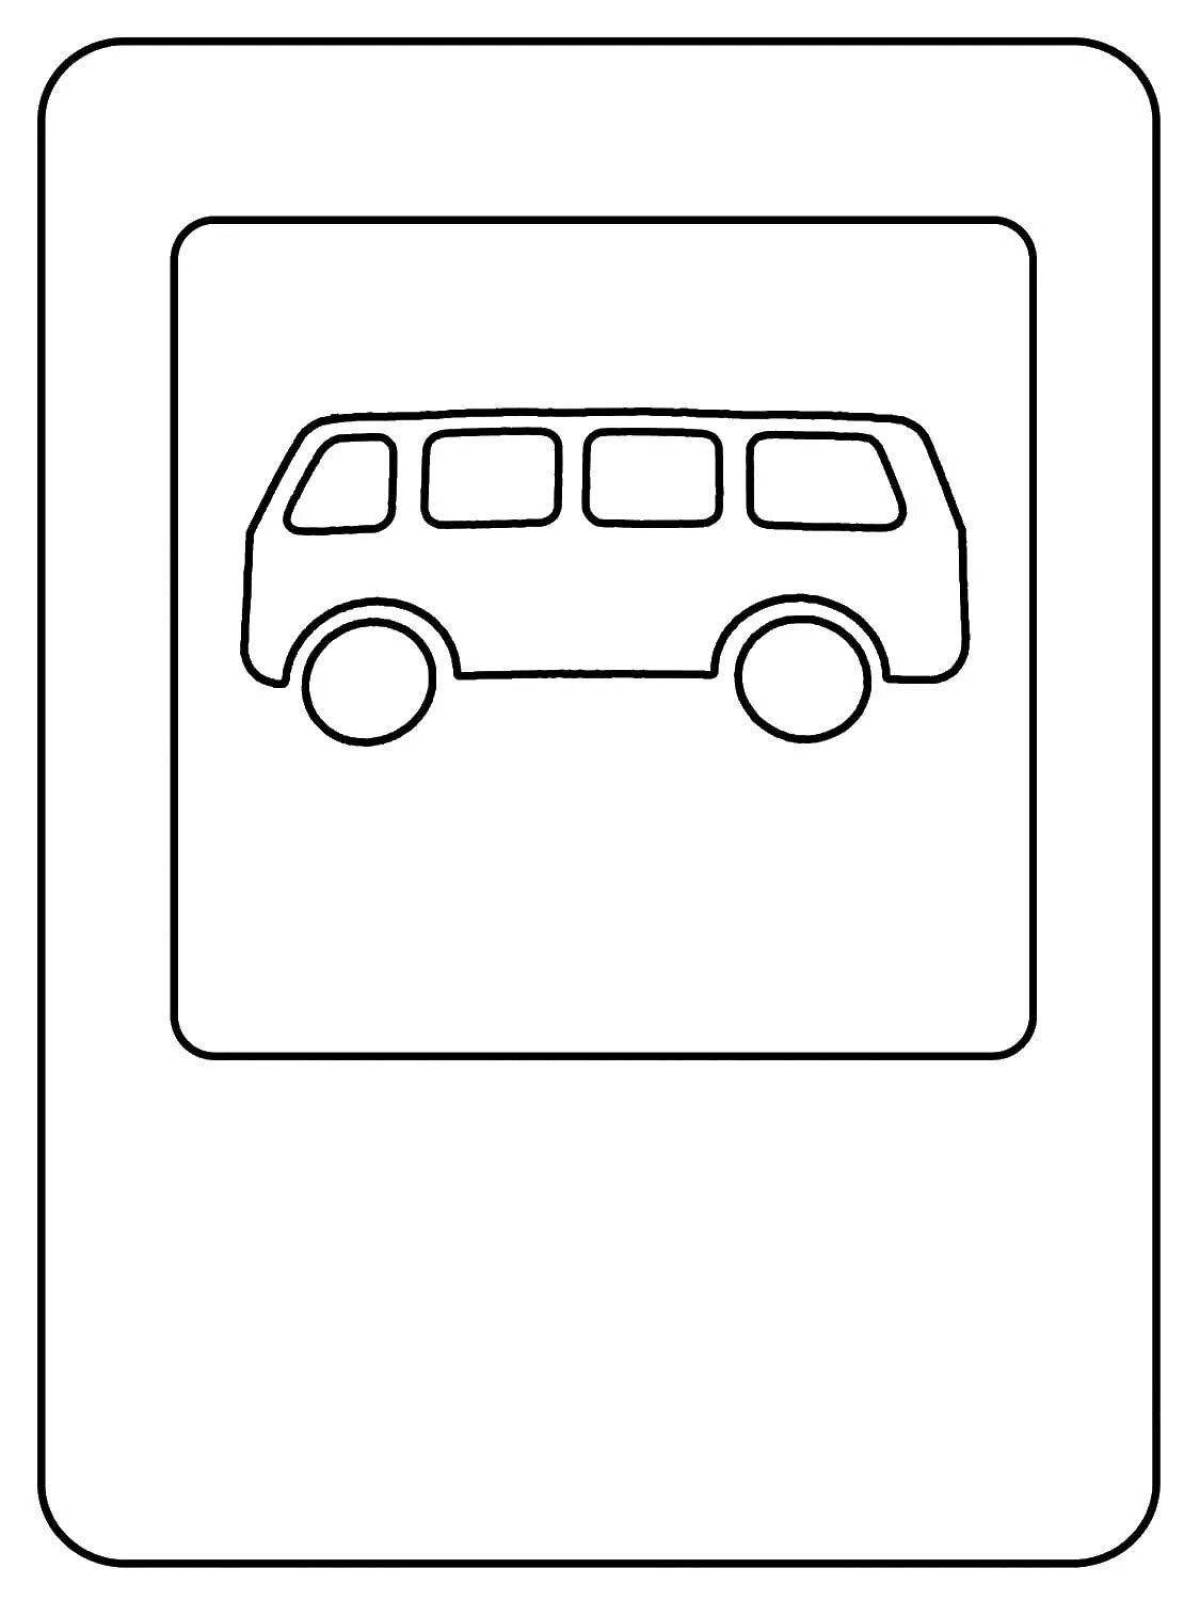 Coloring page of a joyful residential area